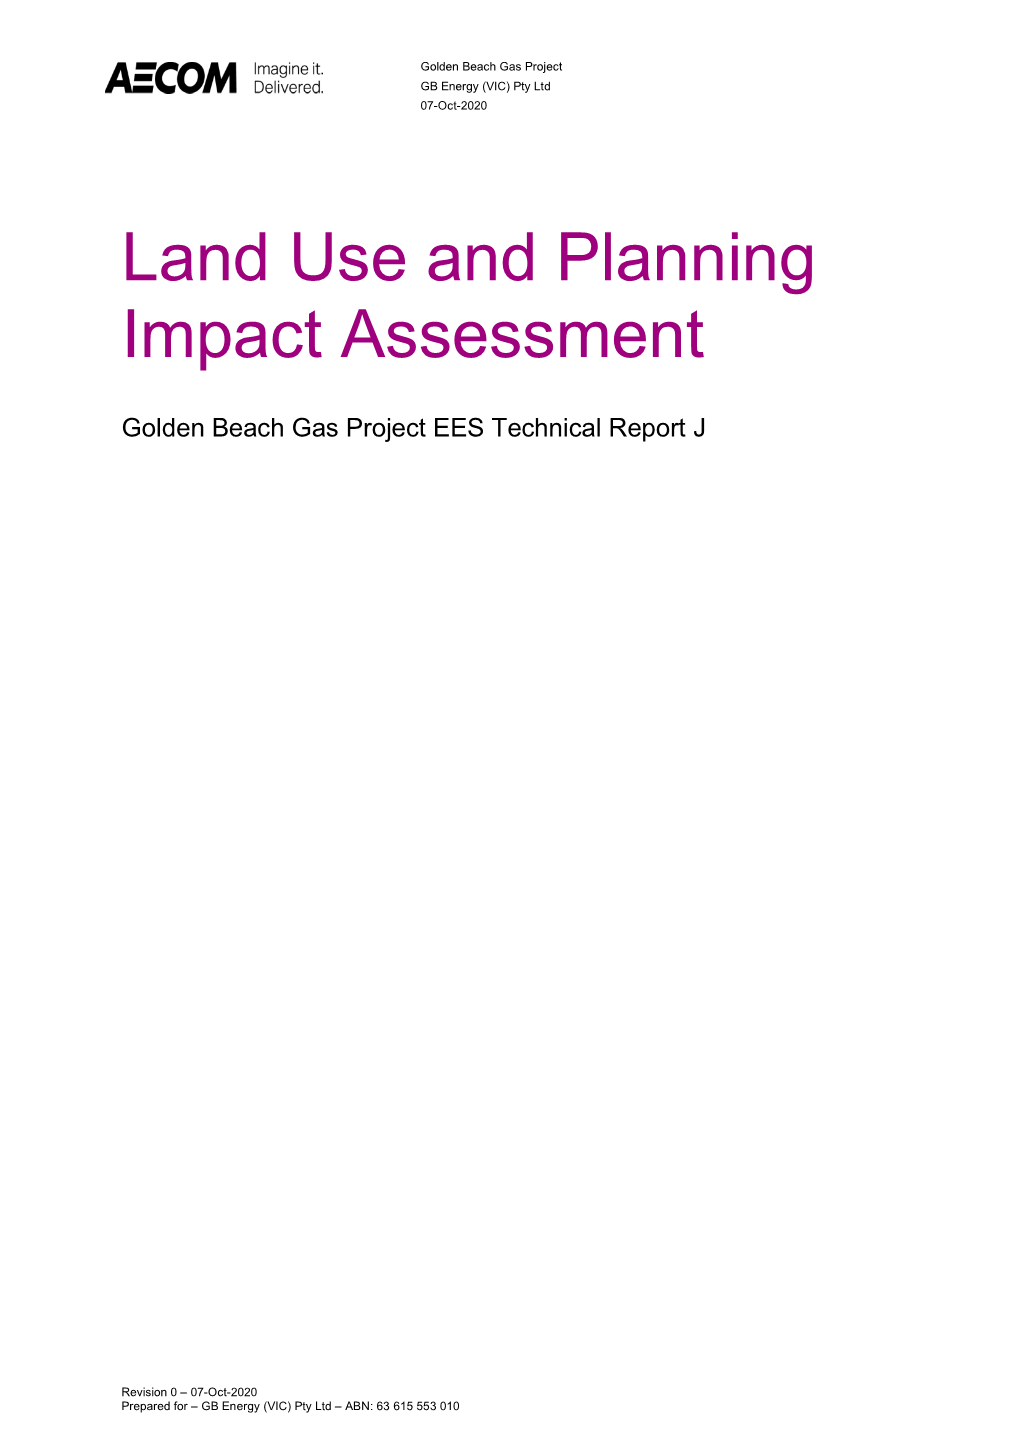 Land Use and Planning Impact Assessment